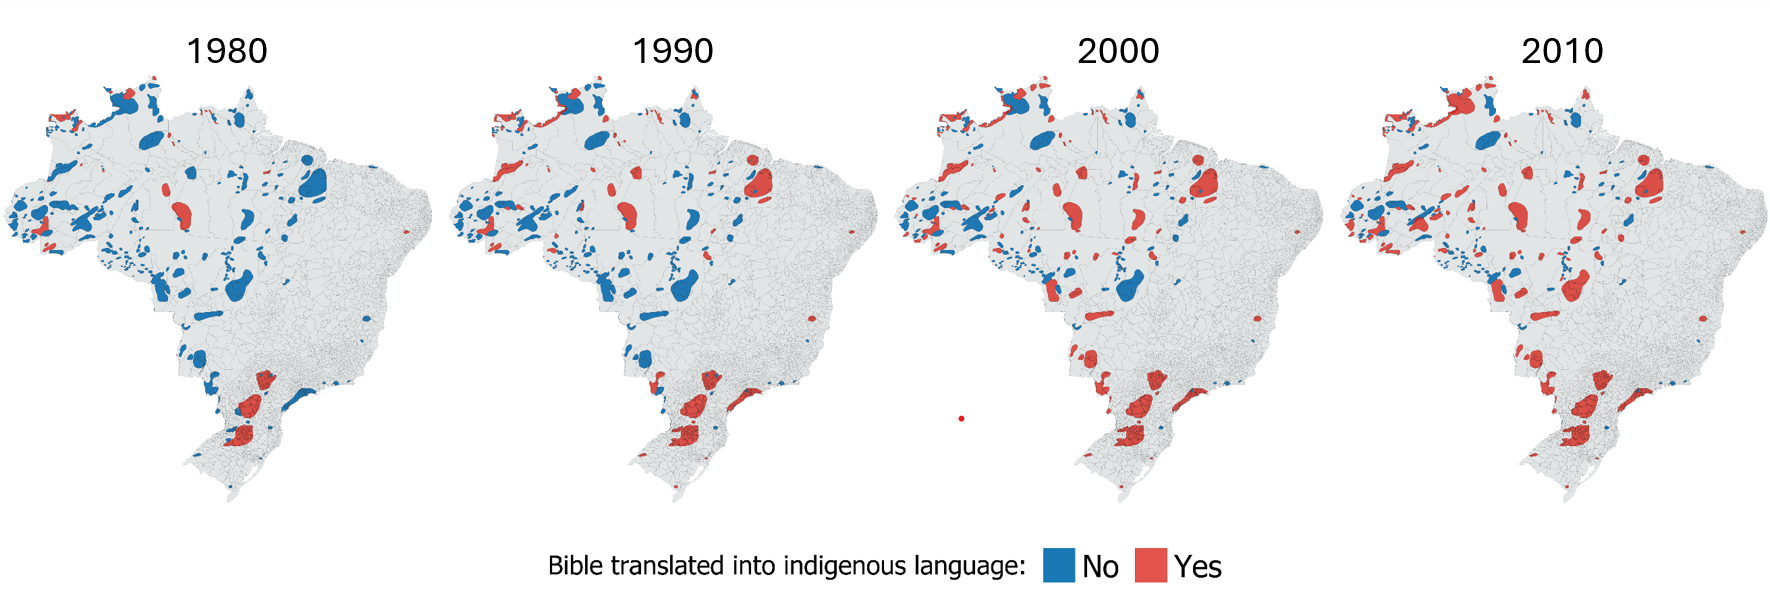 Brother votes for brother: The effects of Pentecostal political influence in Brazil